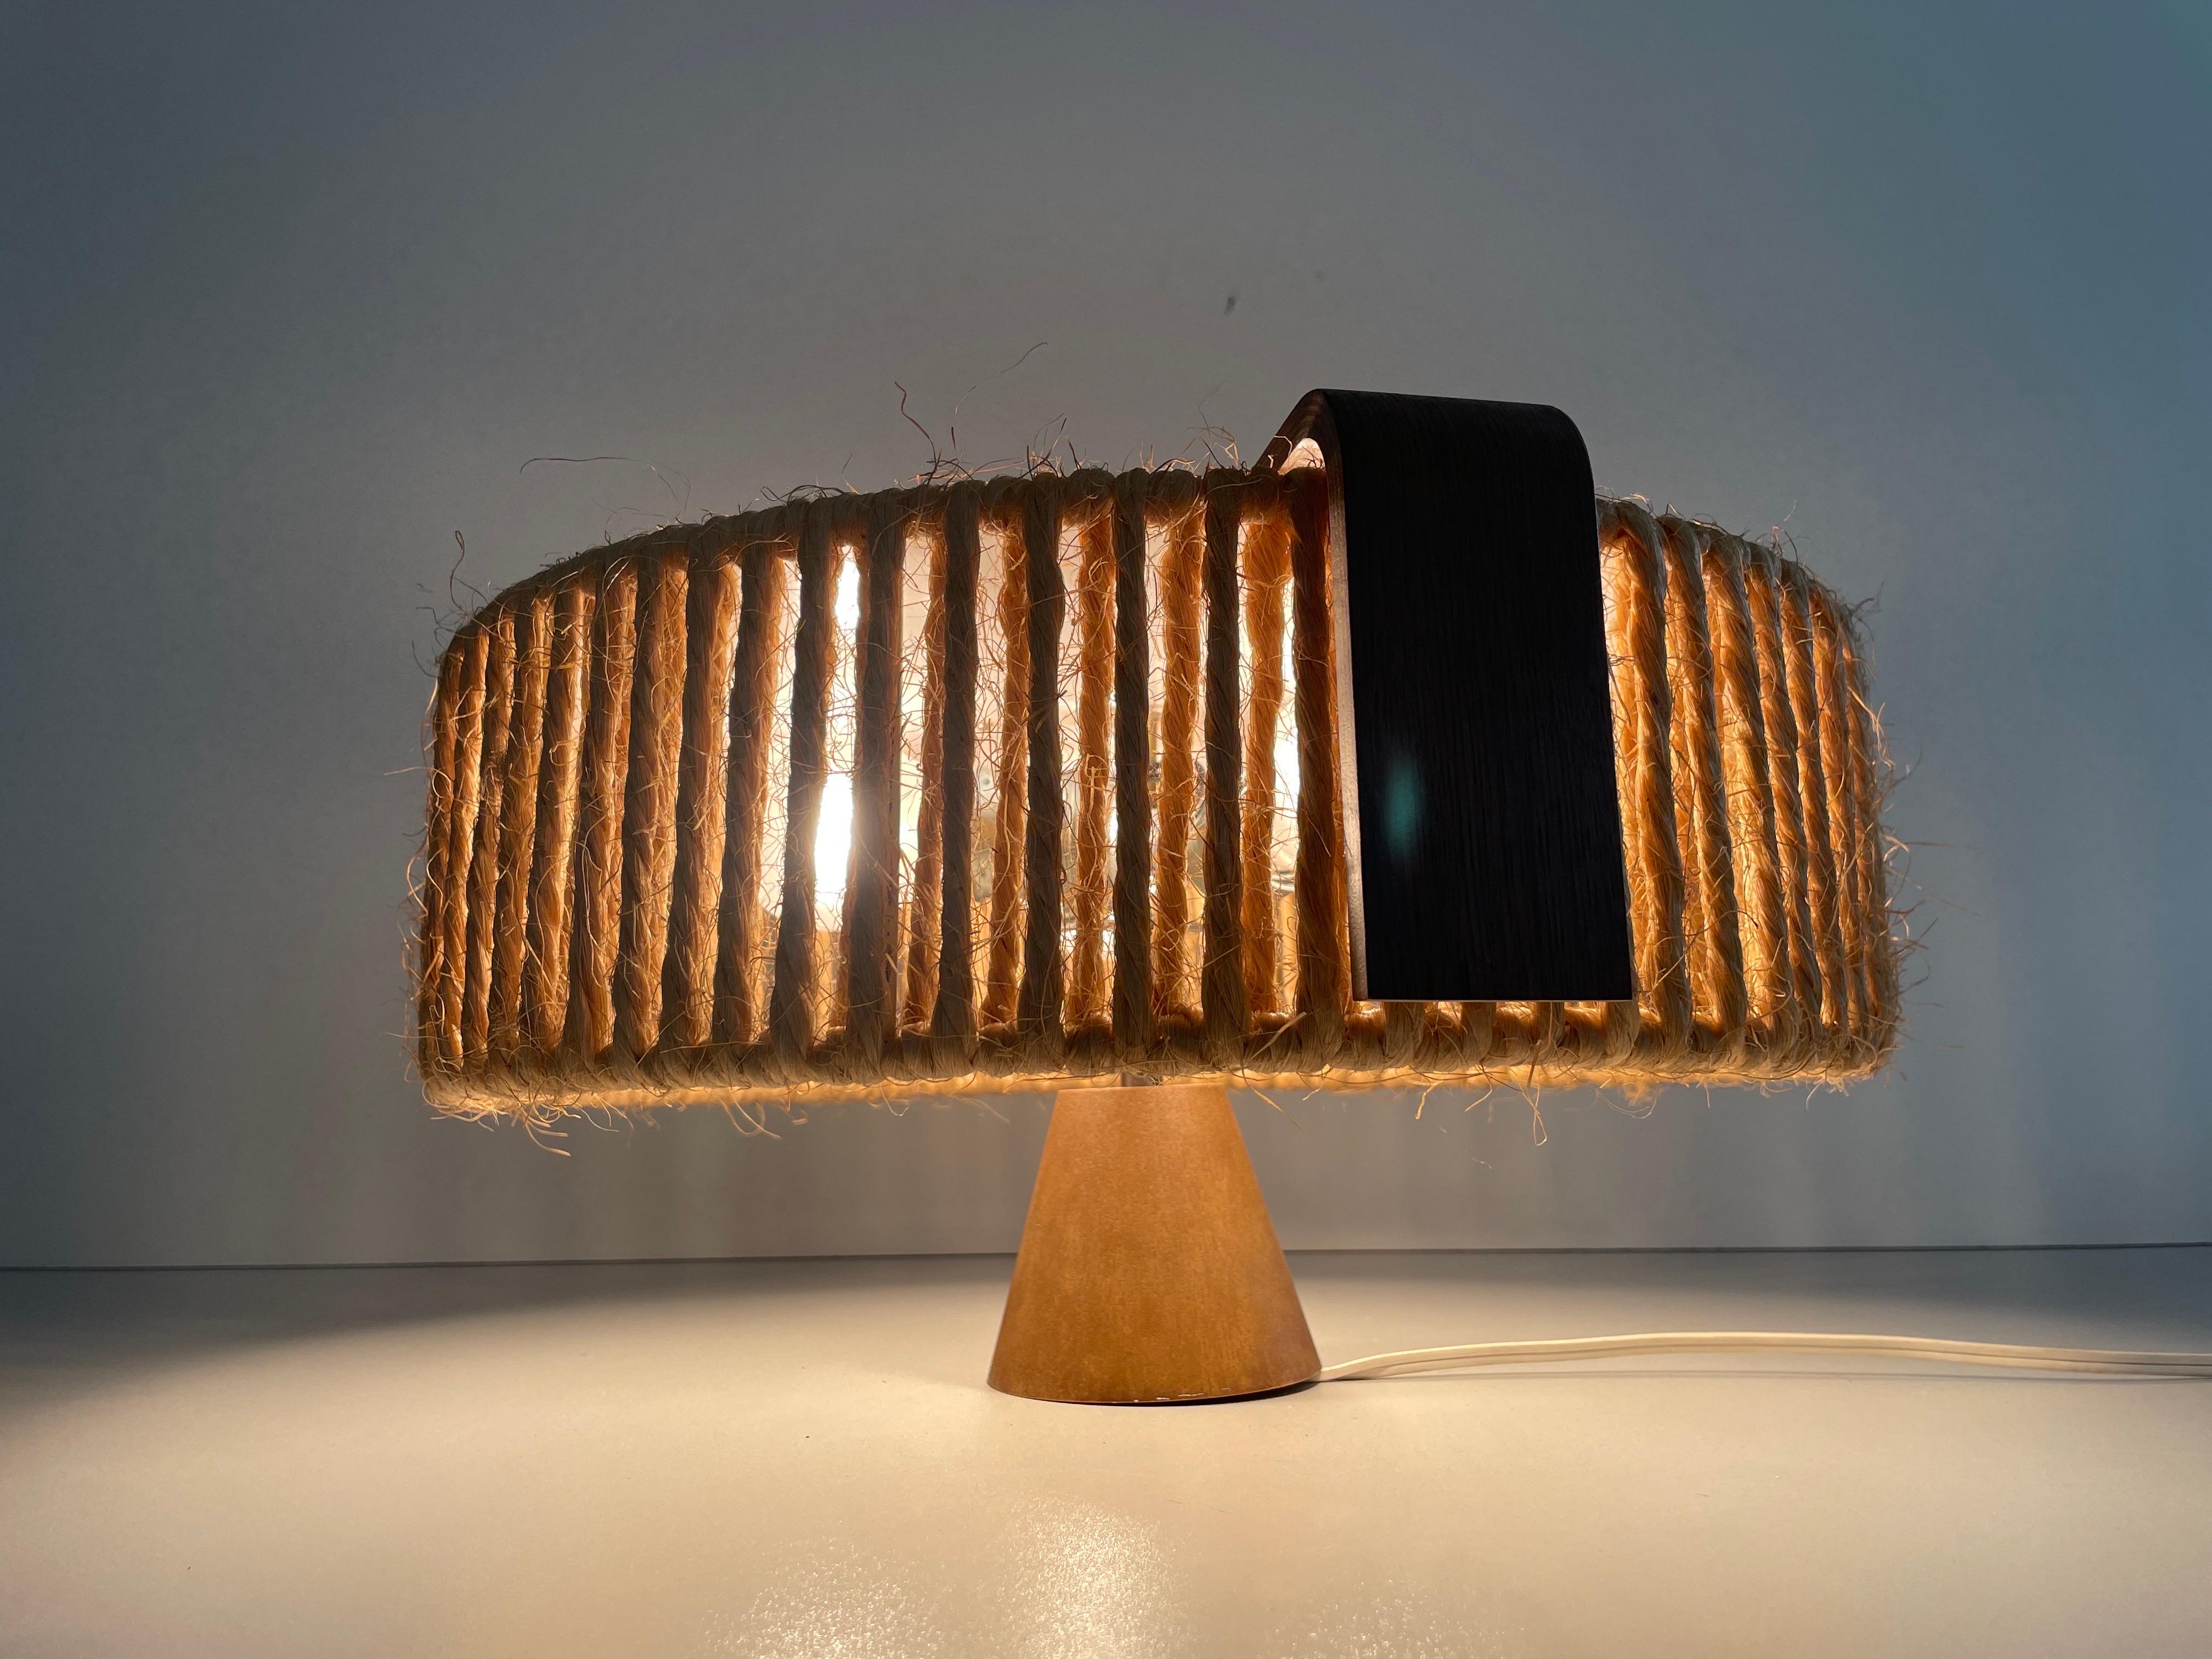 Raffia Bast and Teak Pendant Lamp by Temde, 1960s, Germany For Sale 10